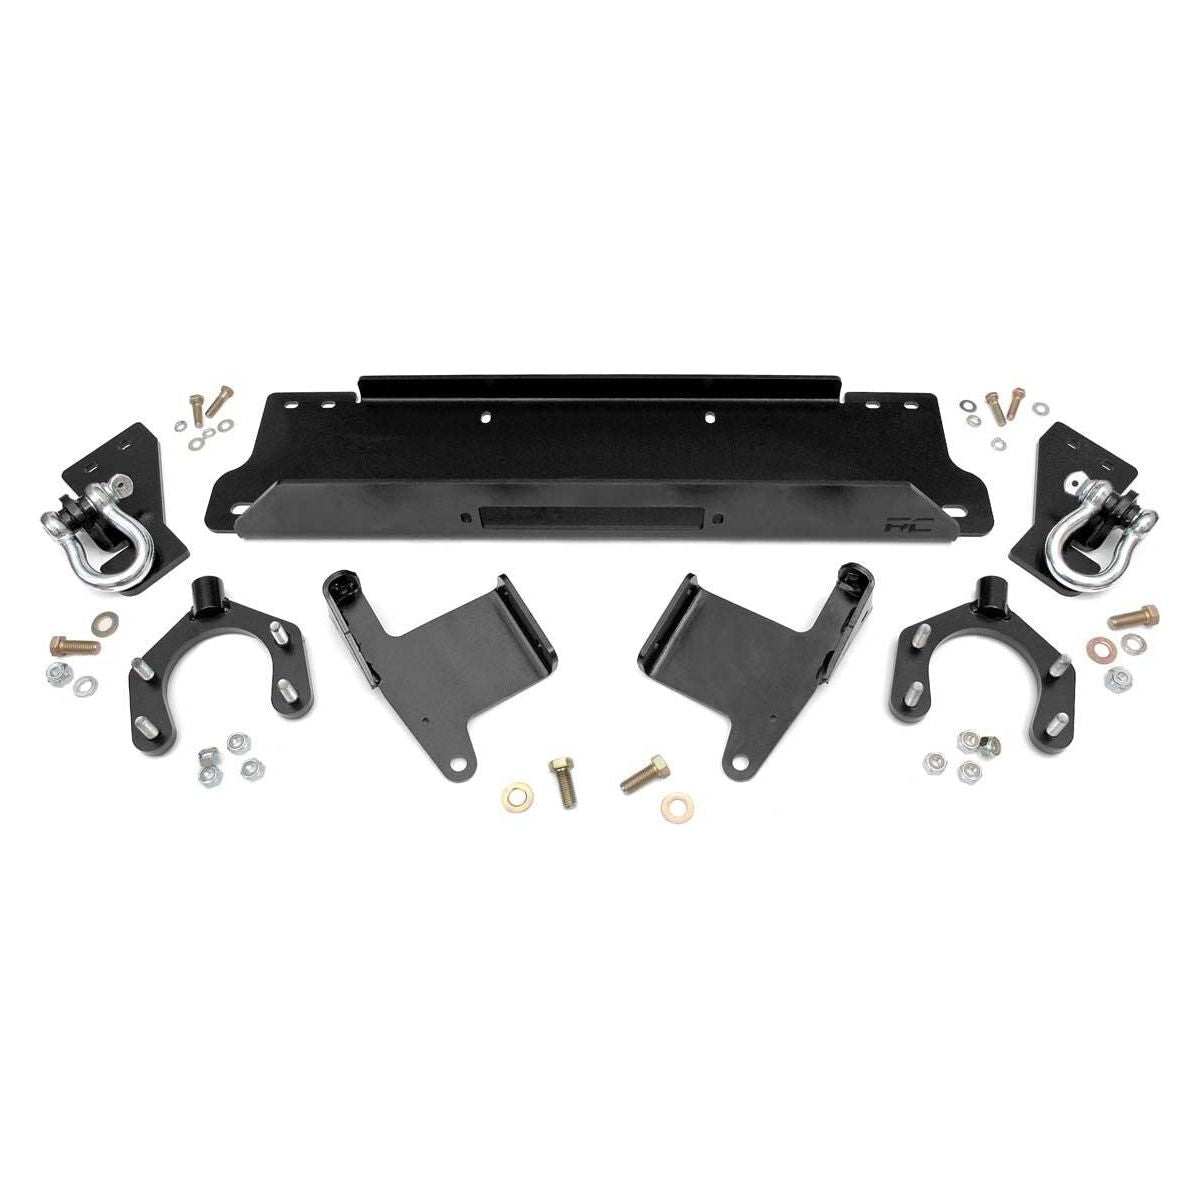 Rough Country Winch Mount Plate (Factory Bumper - D-Rings Kit) for 07-18  Jeep Wrangler JK